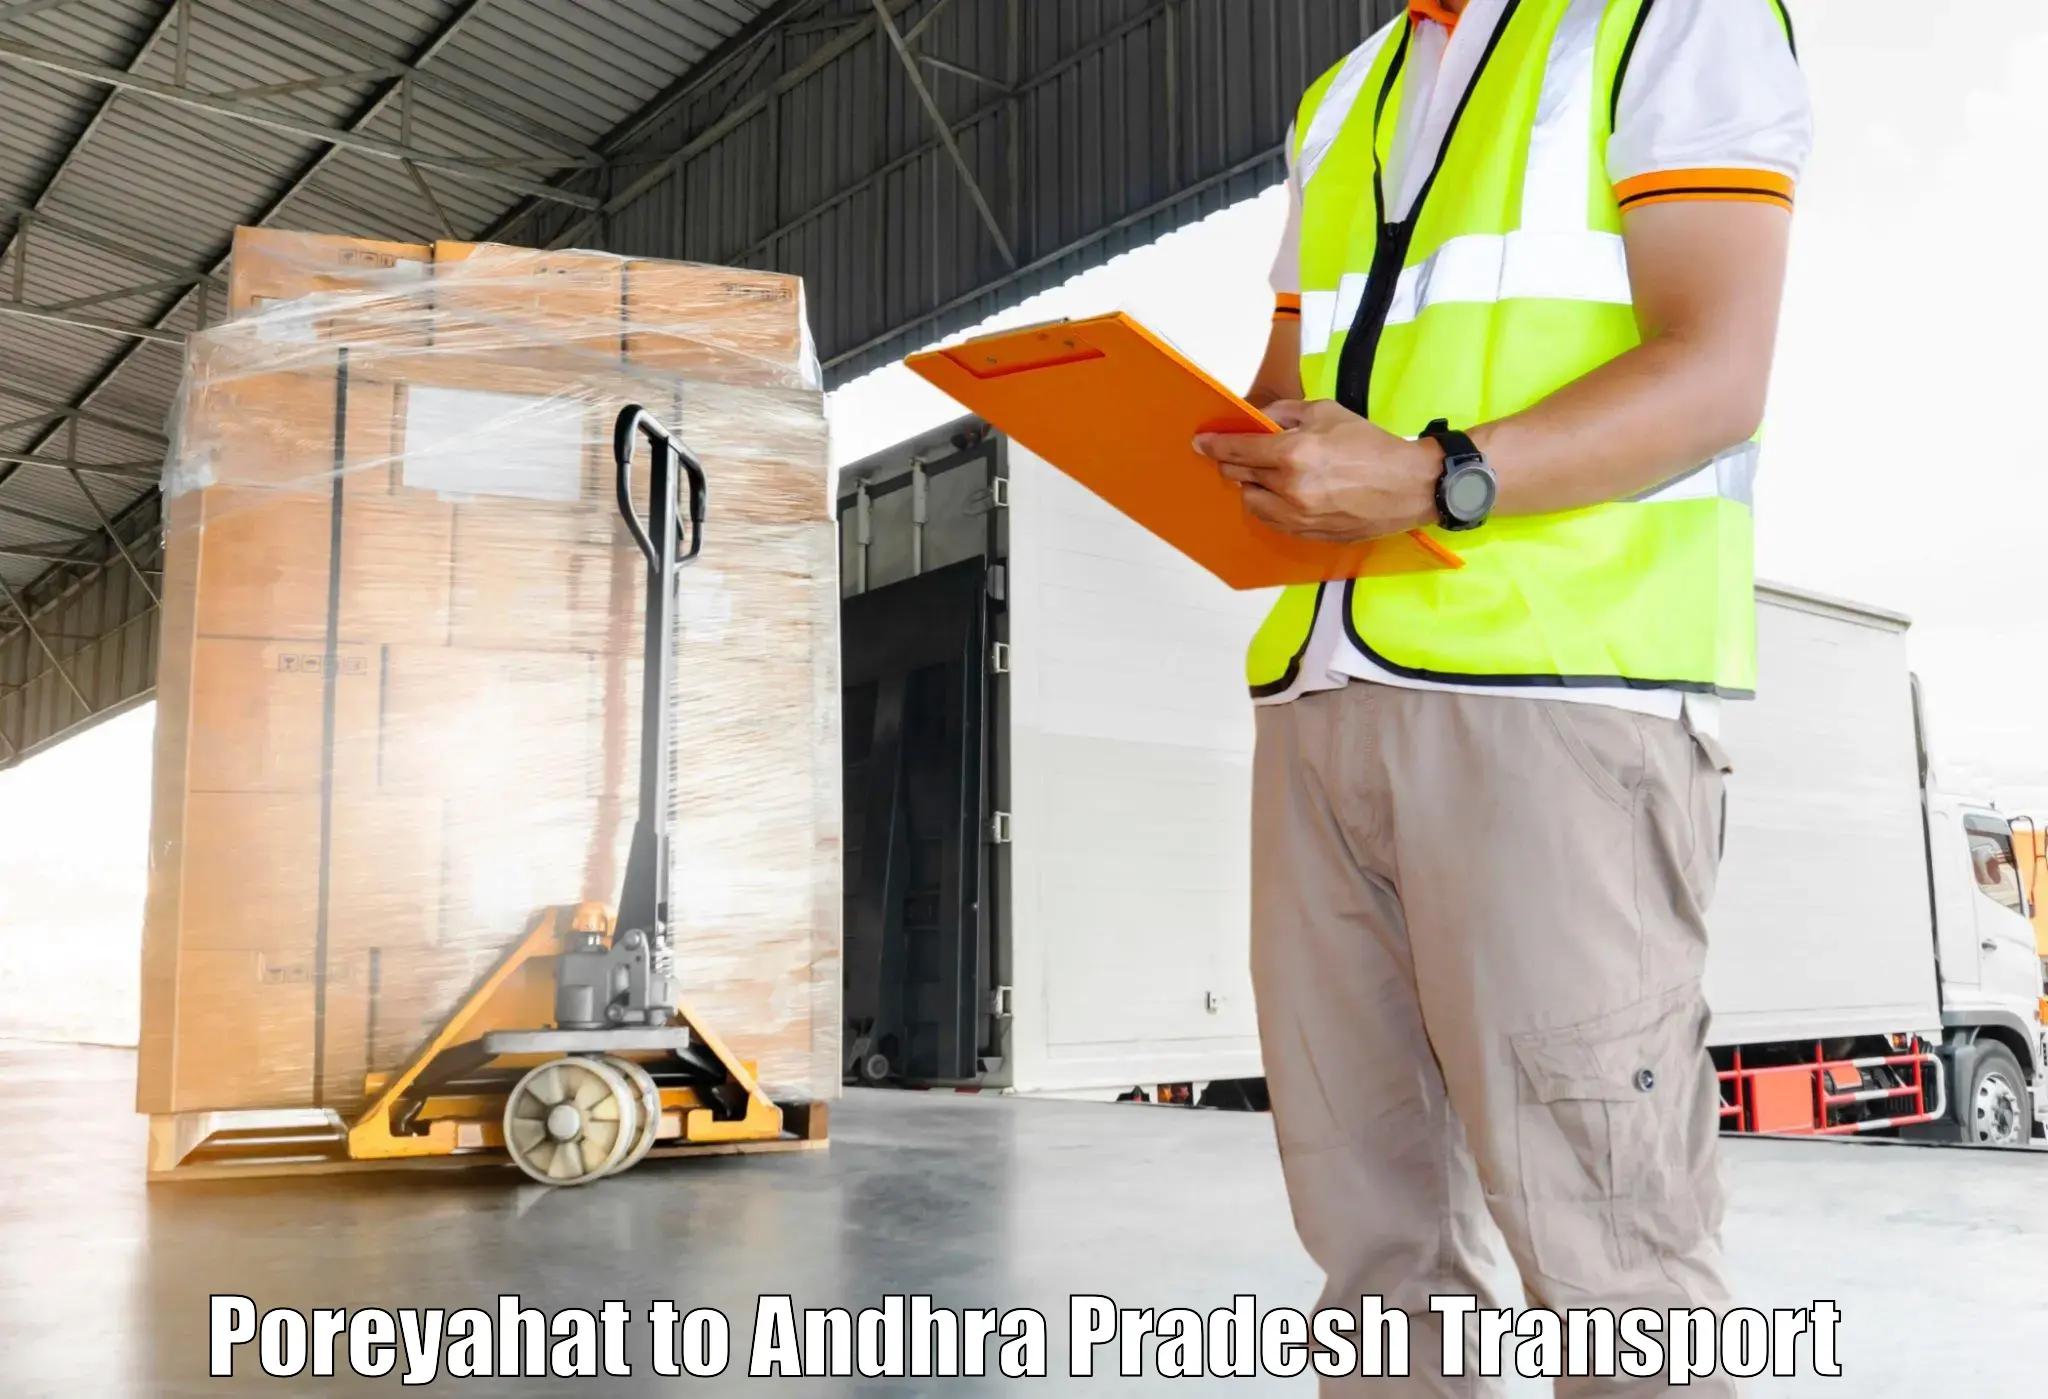 Air freight transport services Poreyahat to Sompeta